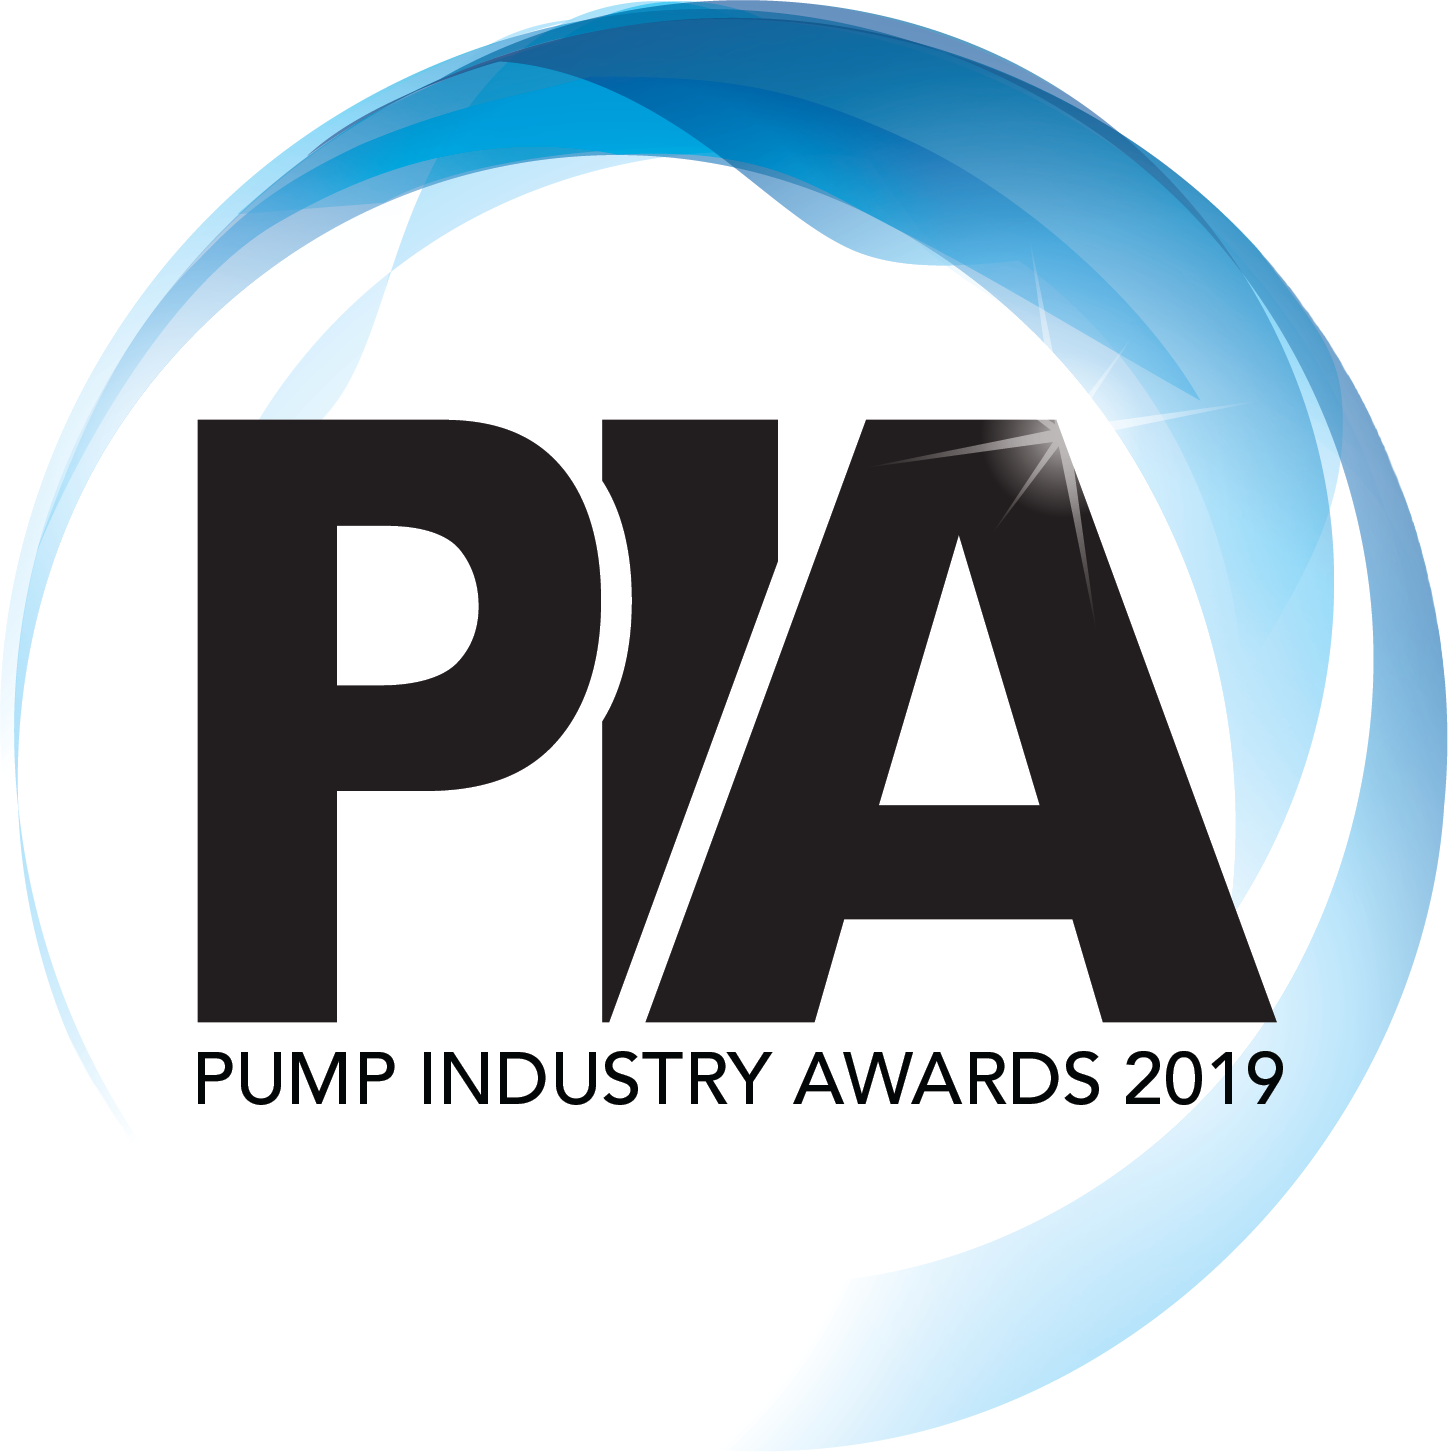 The BPMA is inviting votes for the finalists of the 2019 Pump Industry Awards.